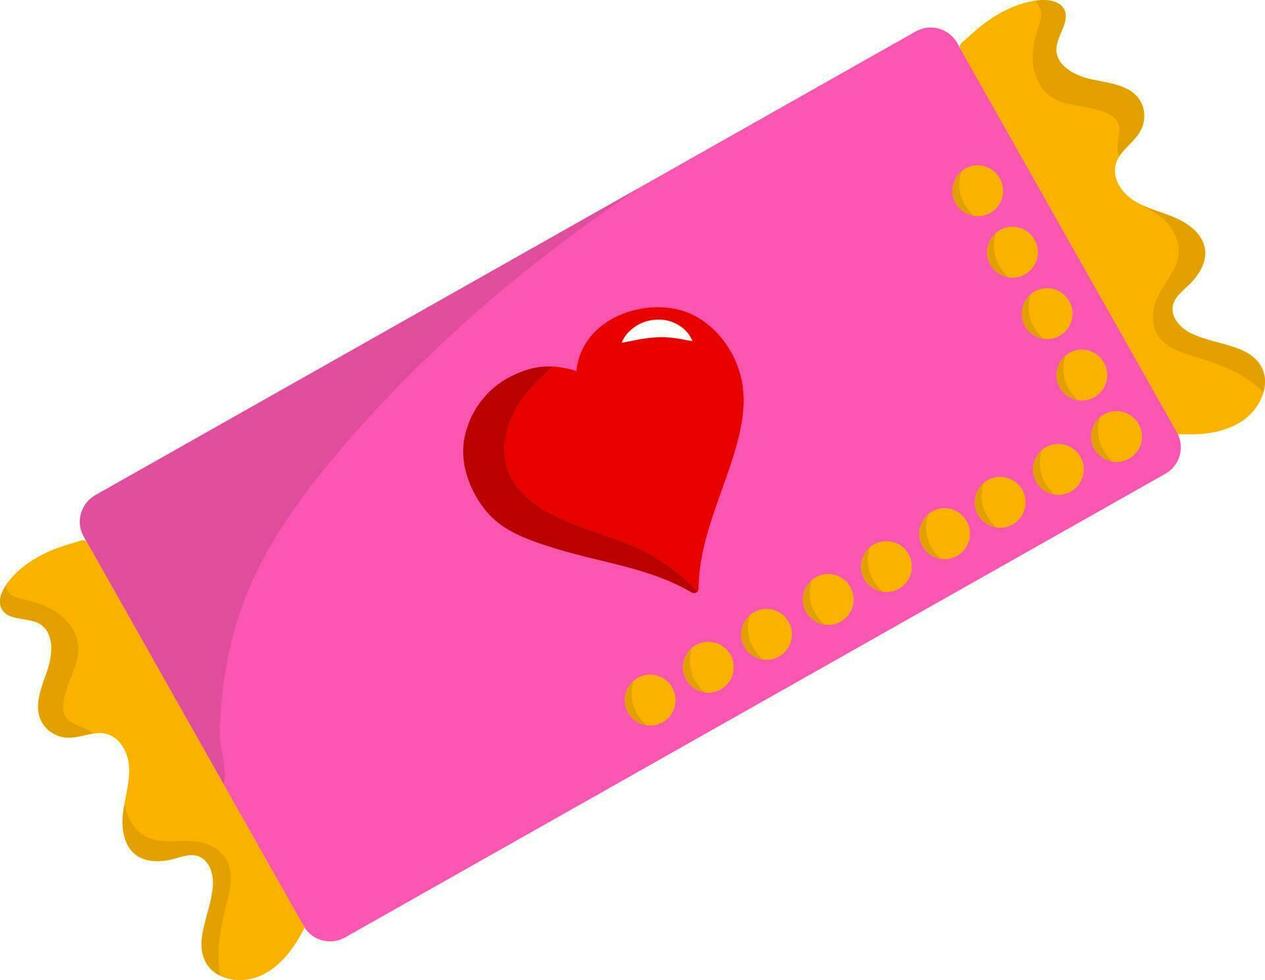 Heart With Ticket Icon In Pink And Yellow Color. vector